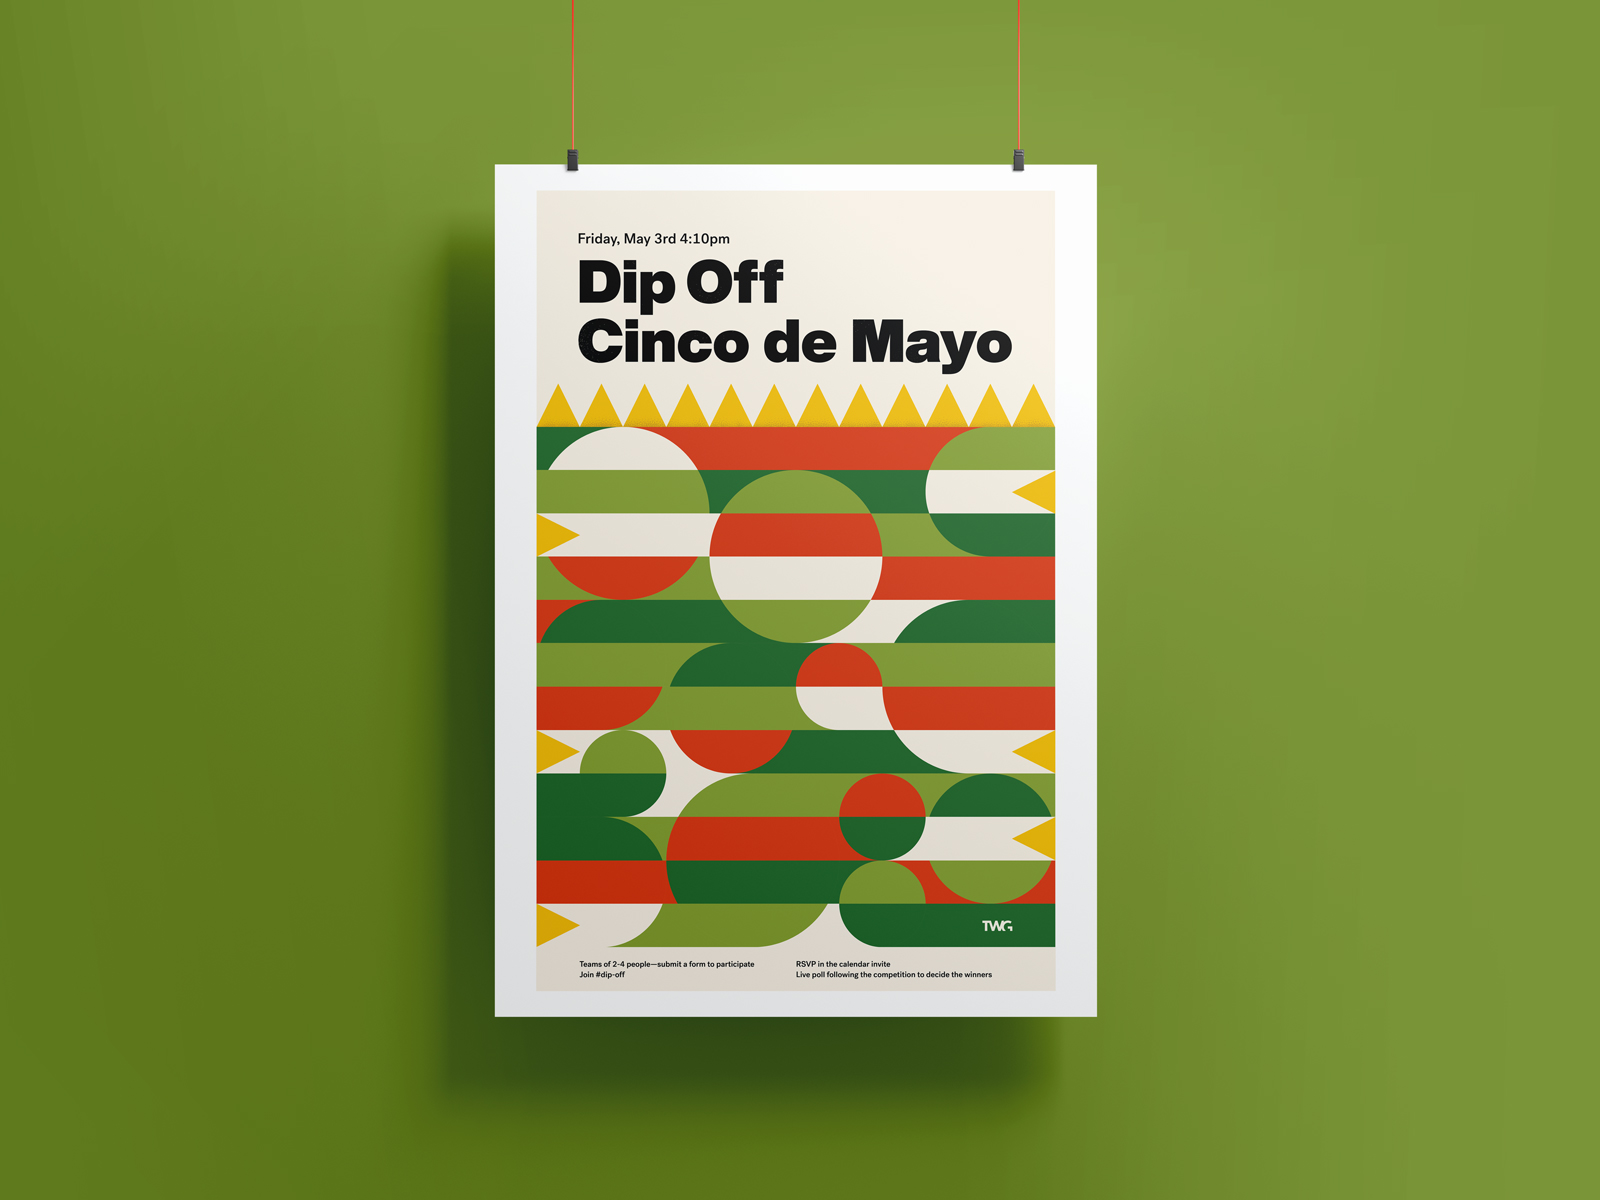 Cinco de mayo dip making event poster against a green background.